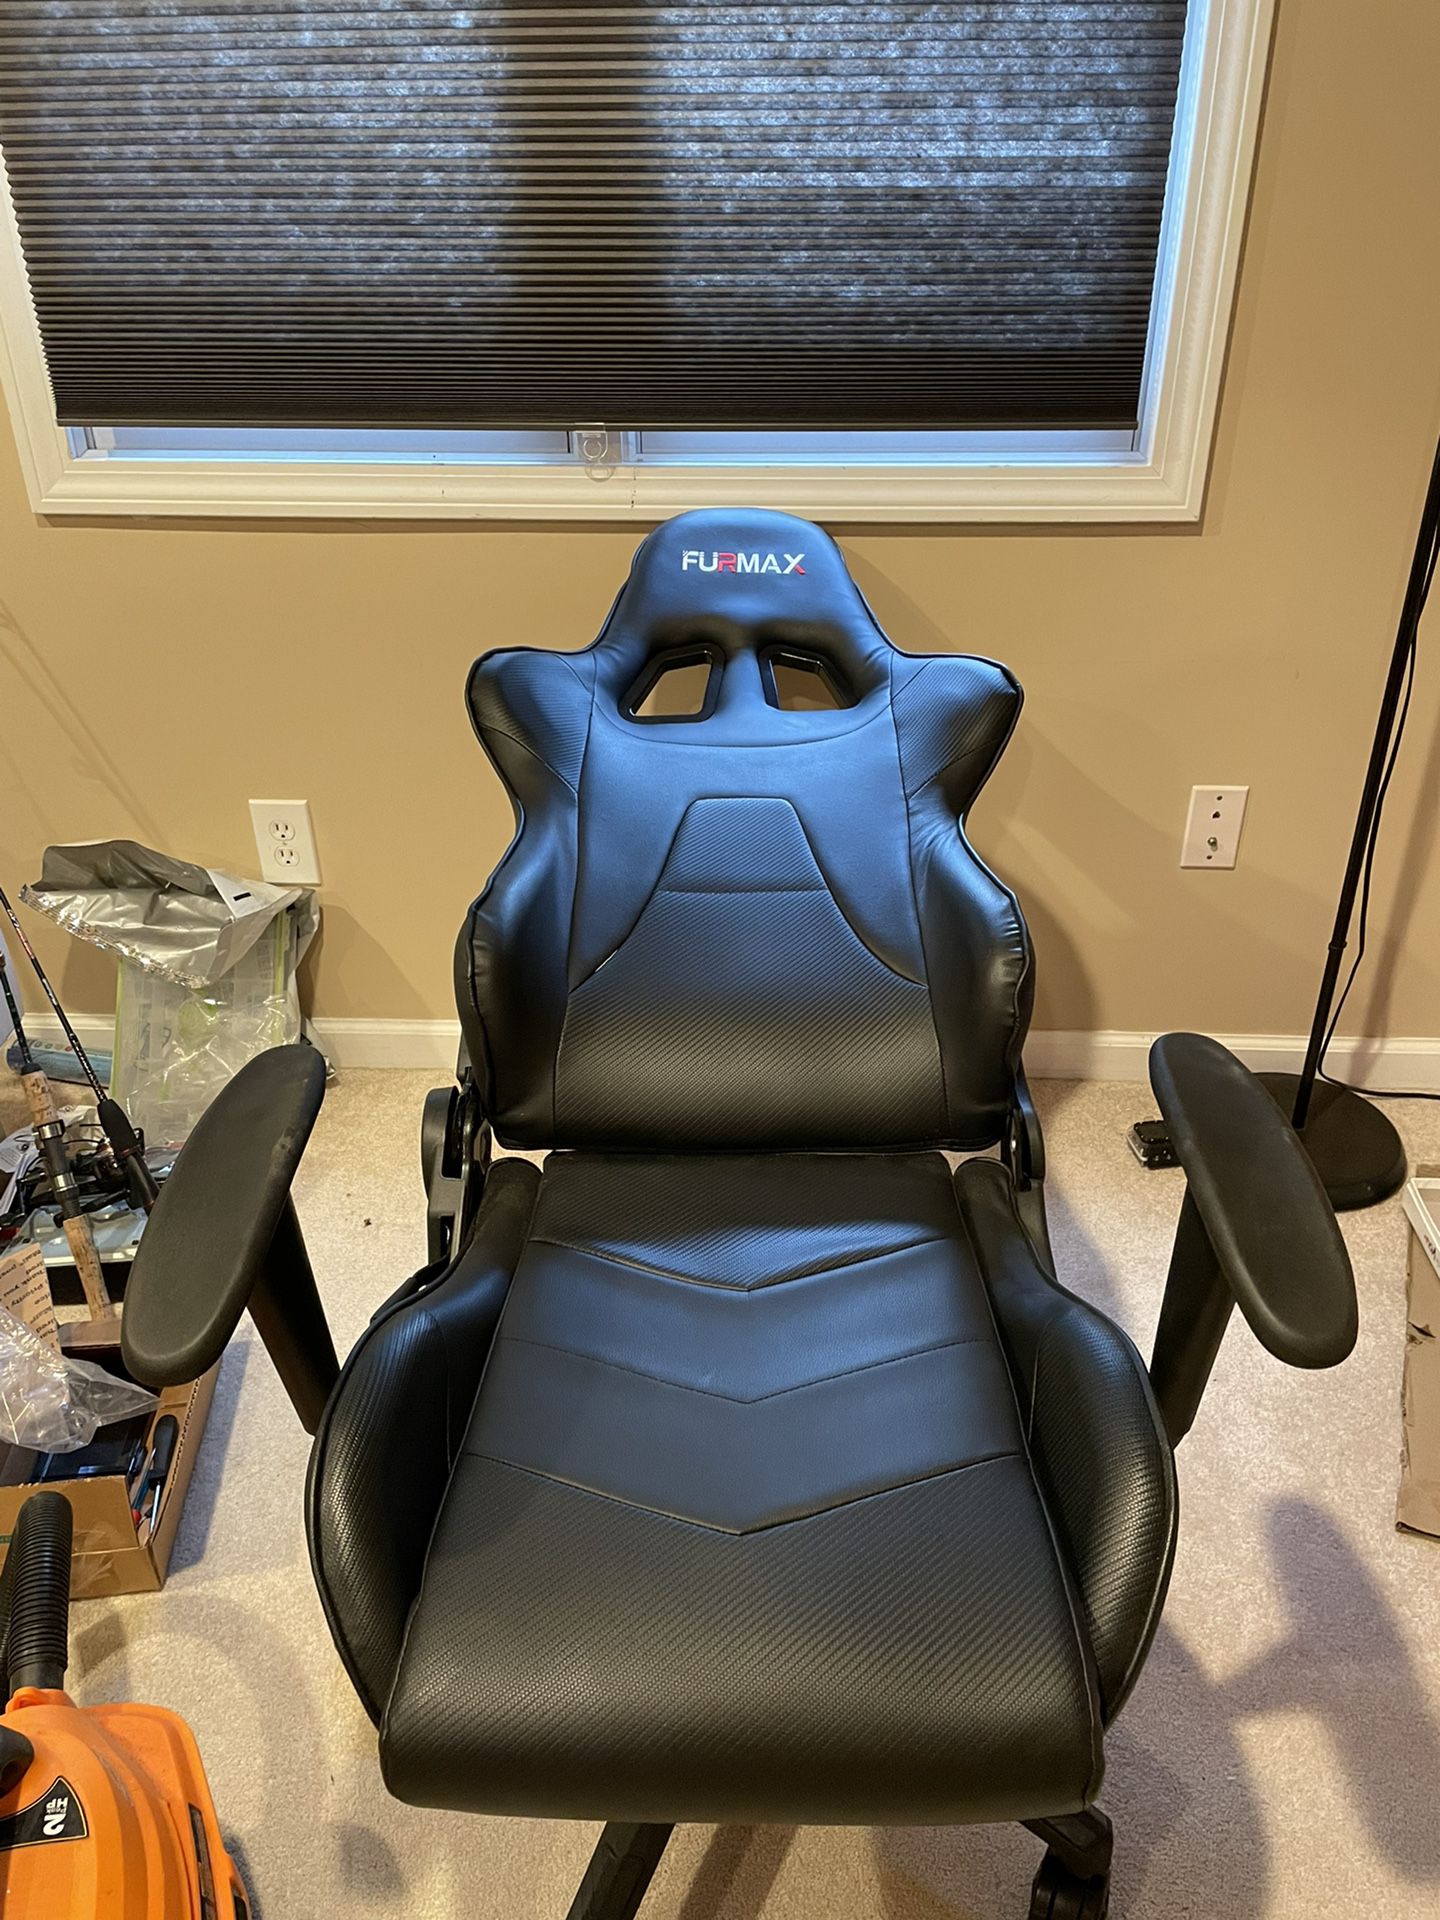 Furmax Racing Style Game/Office Chair